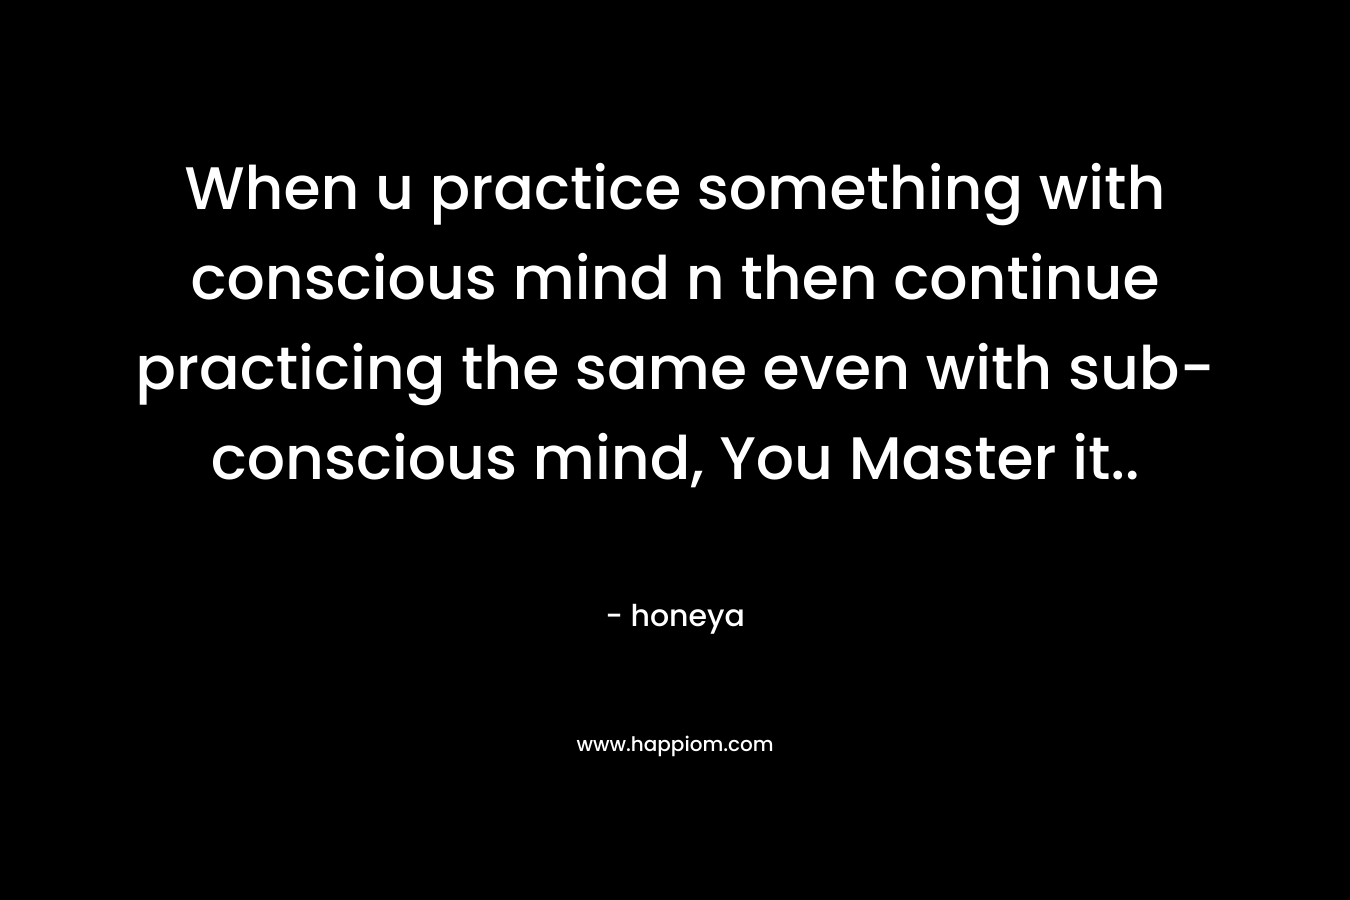 When u practice something with conscious mind n then continue practicing the same even with sub-conscious mind, You Master it..